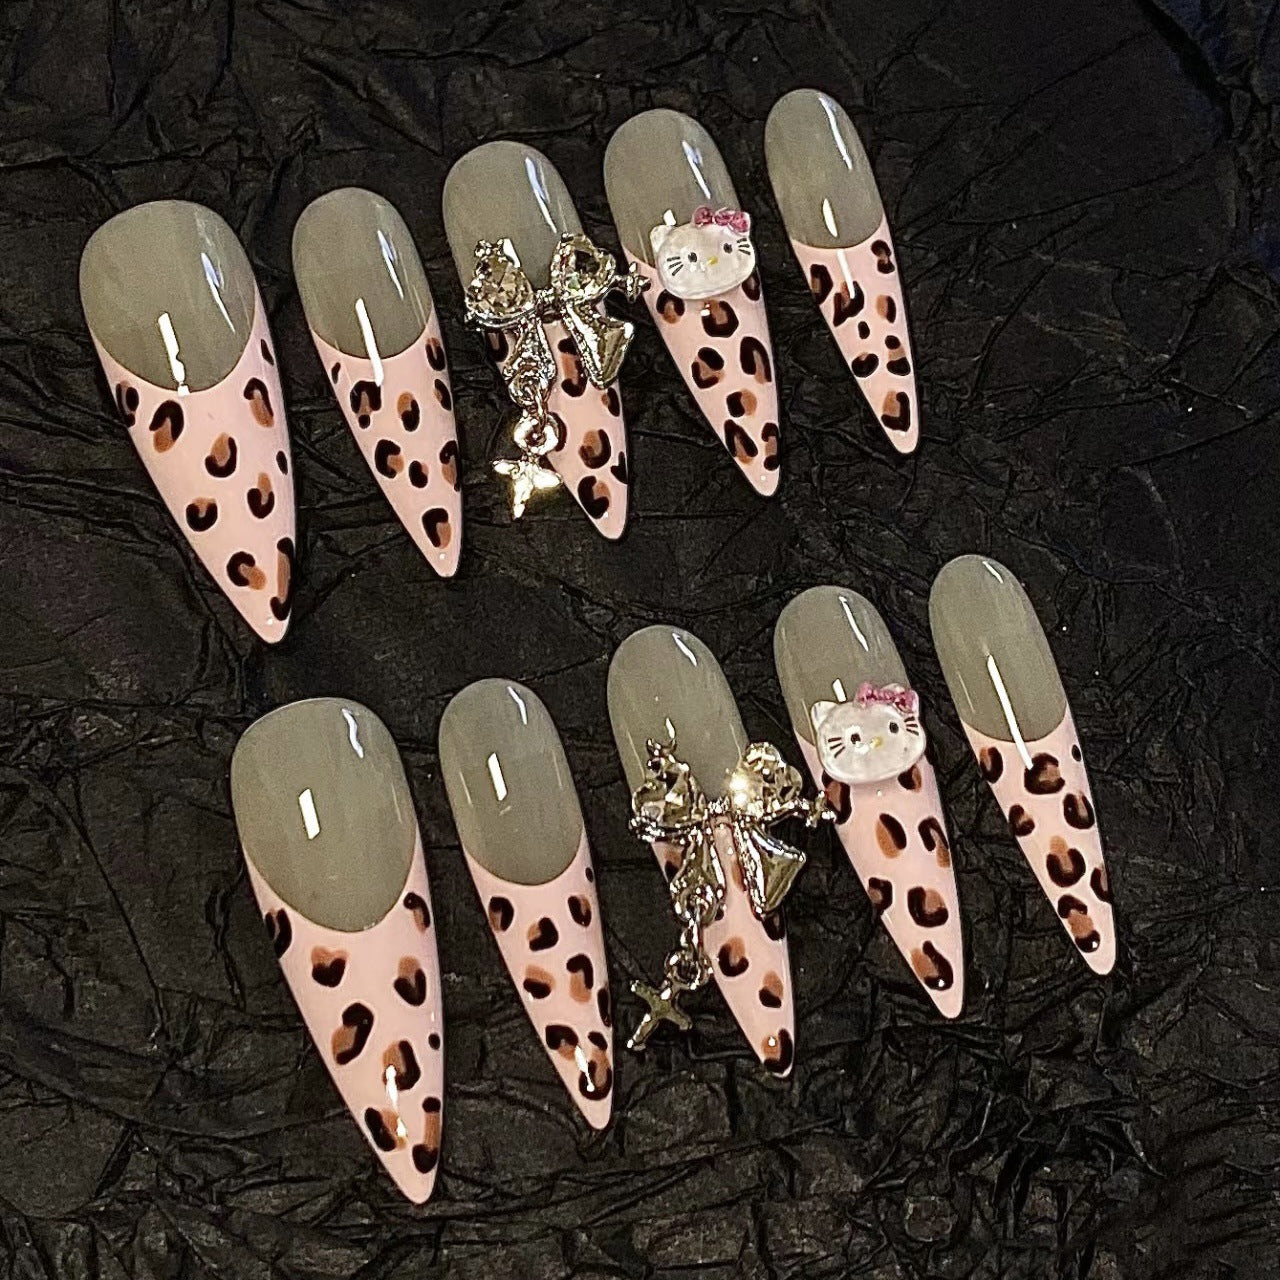 LEOPARD KITTY-TEN PIECES OF HANDCRAFTED PRESS ON NAIL